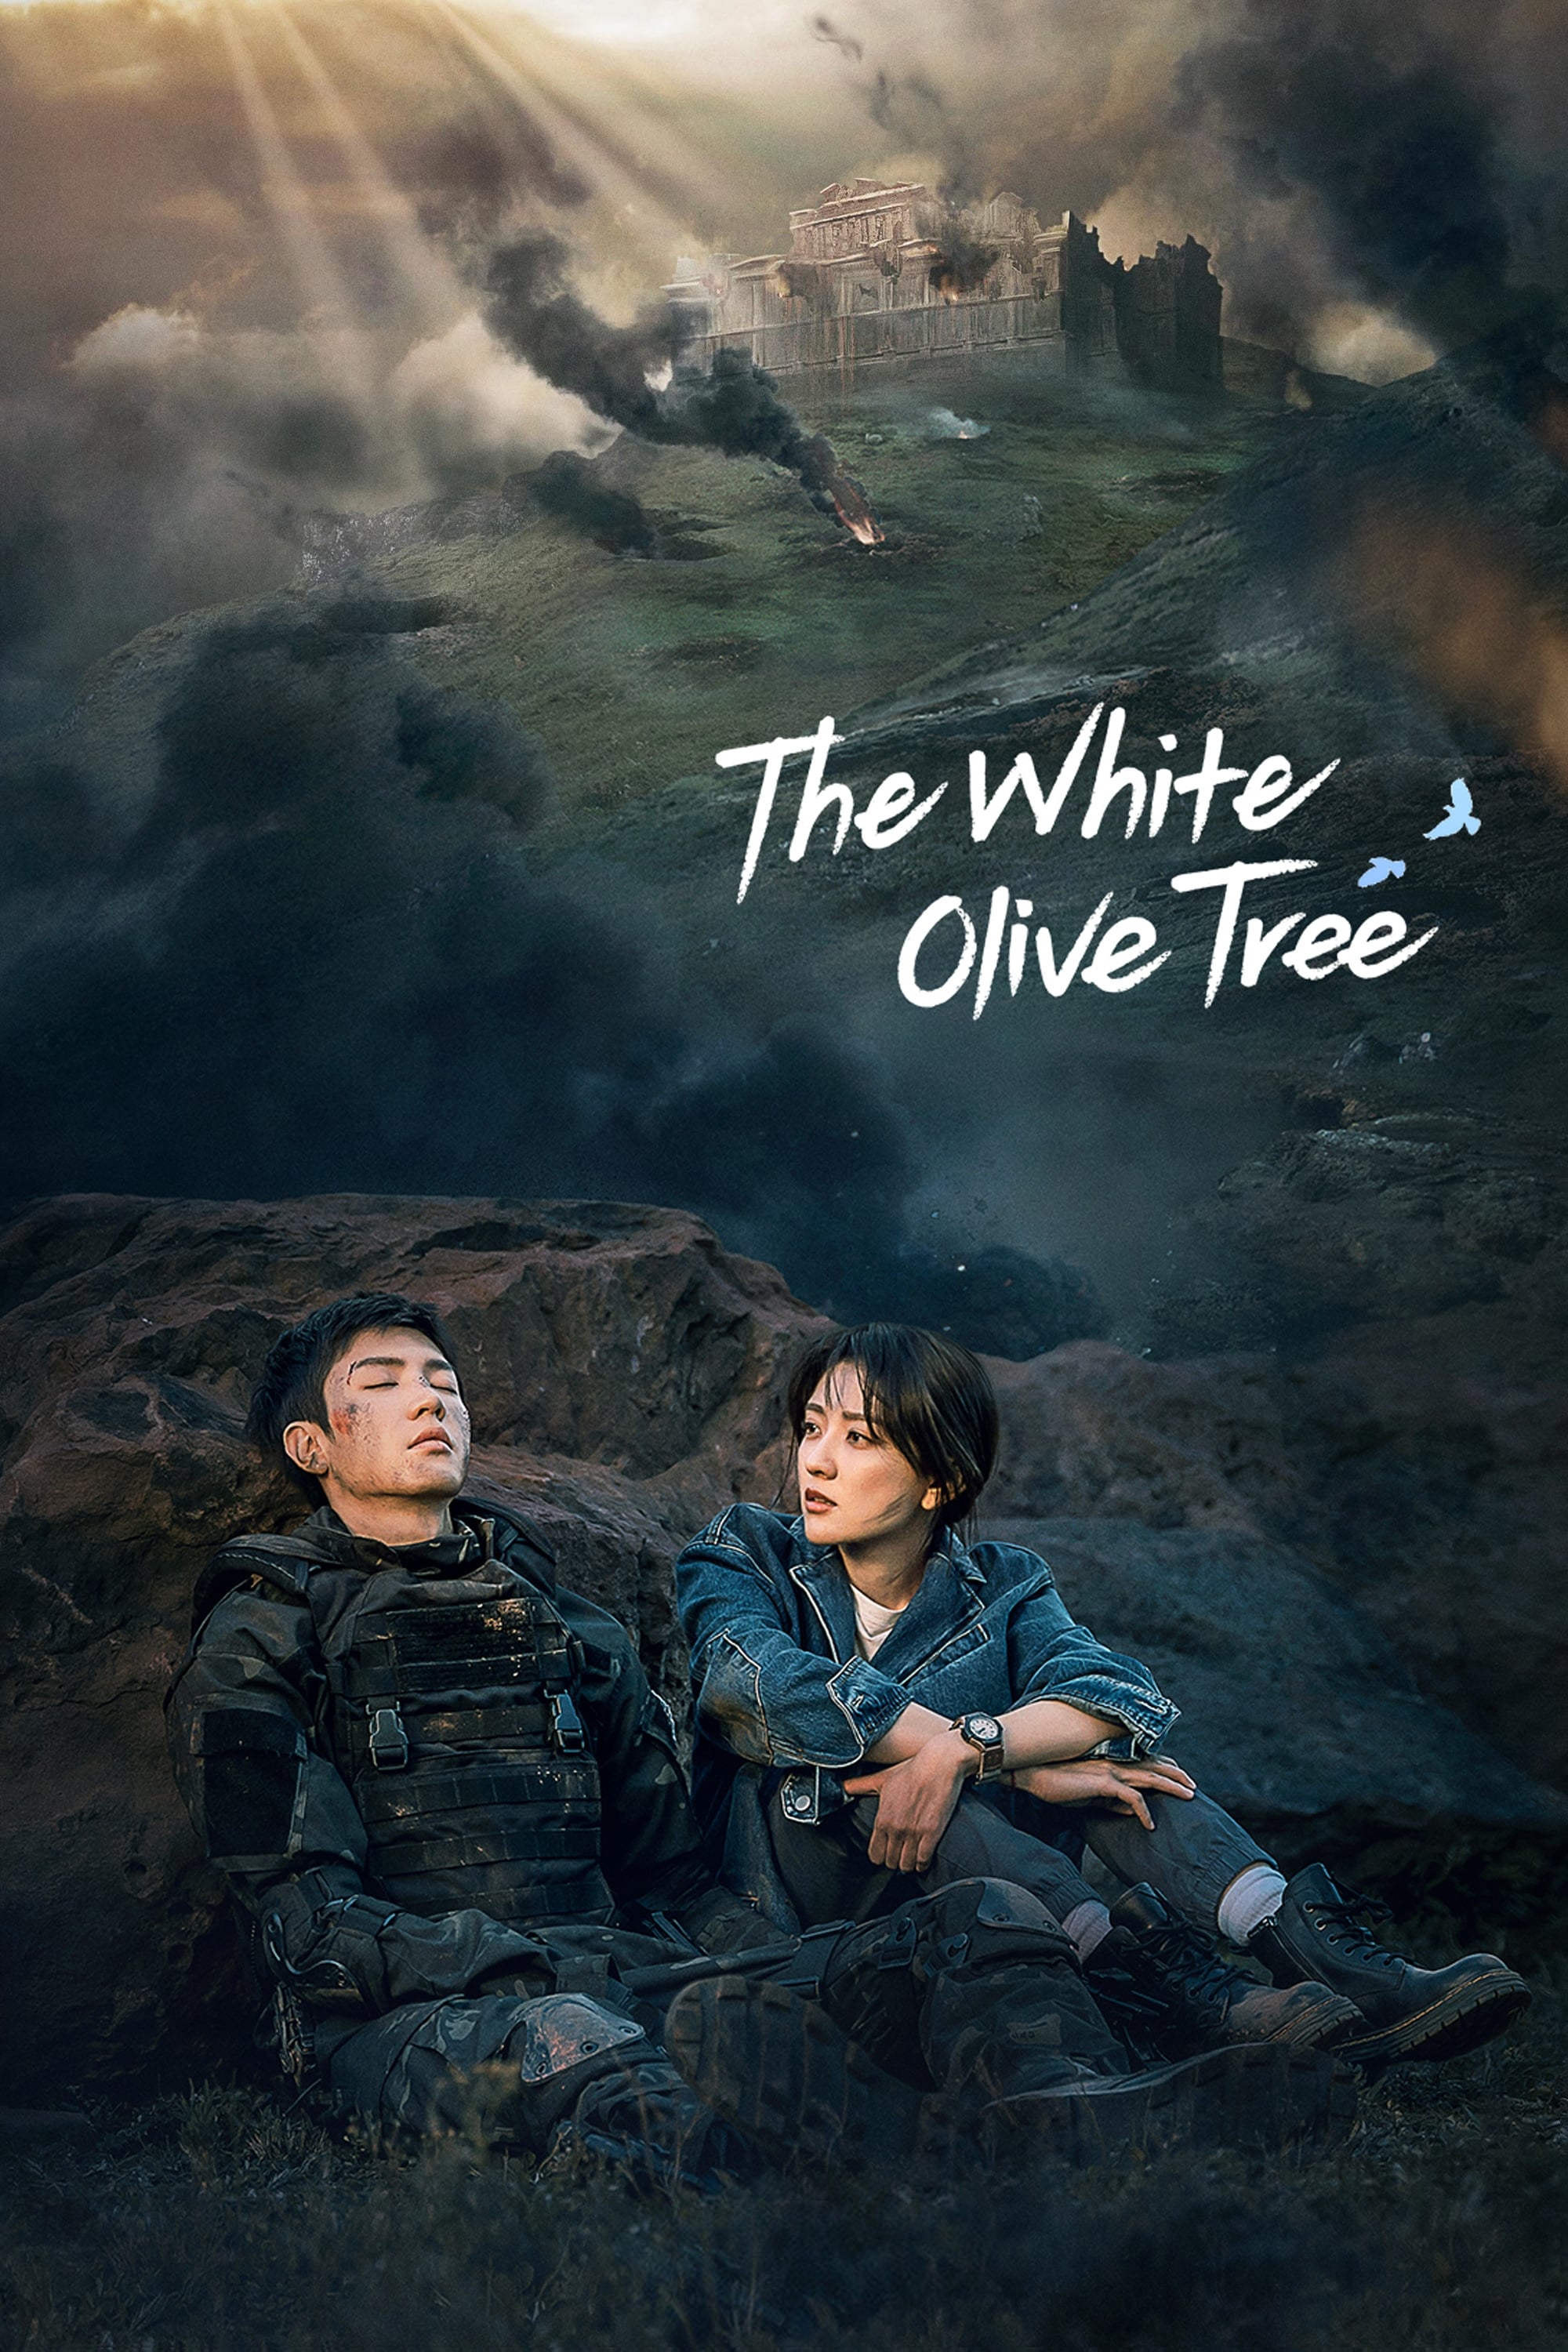 The White Olive Tree